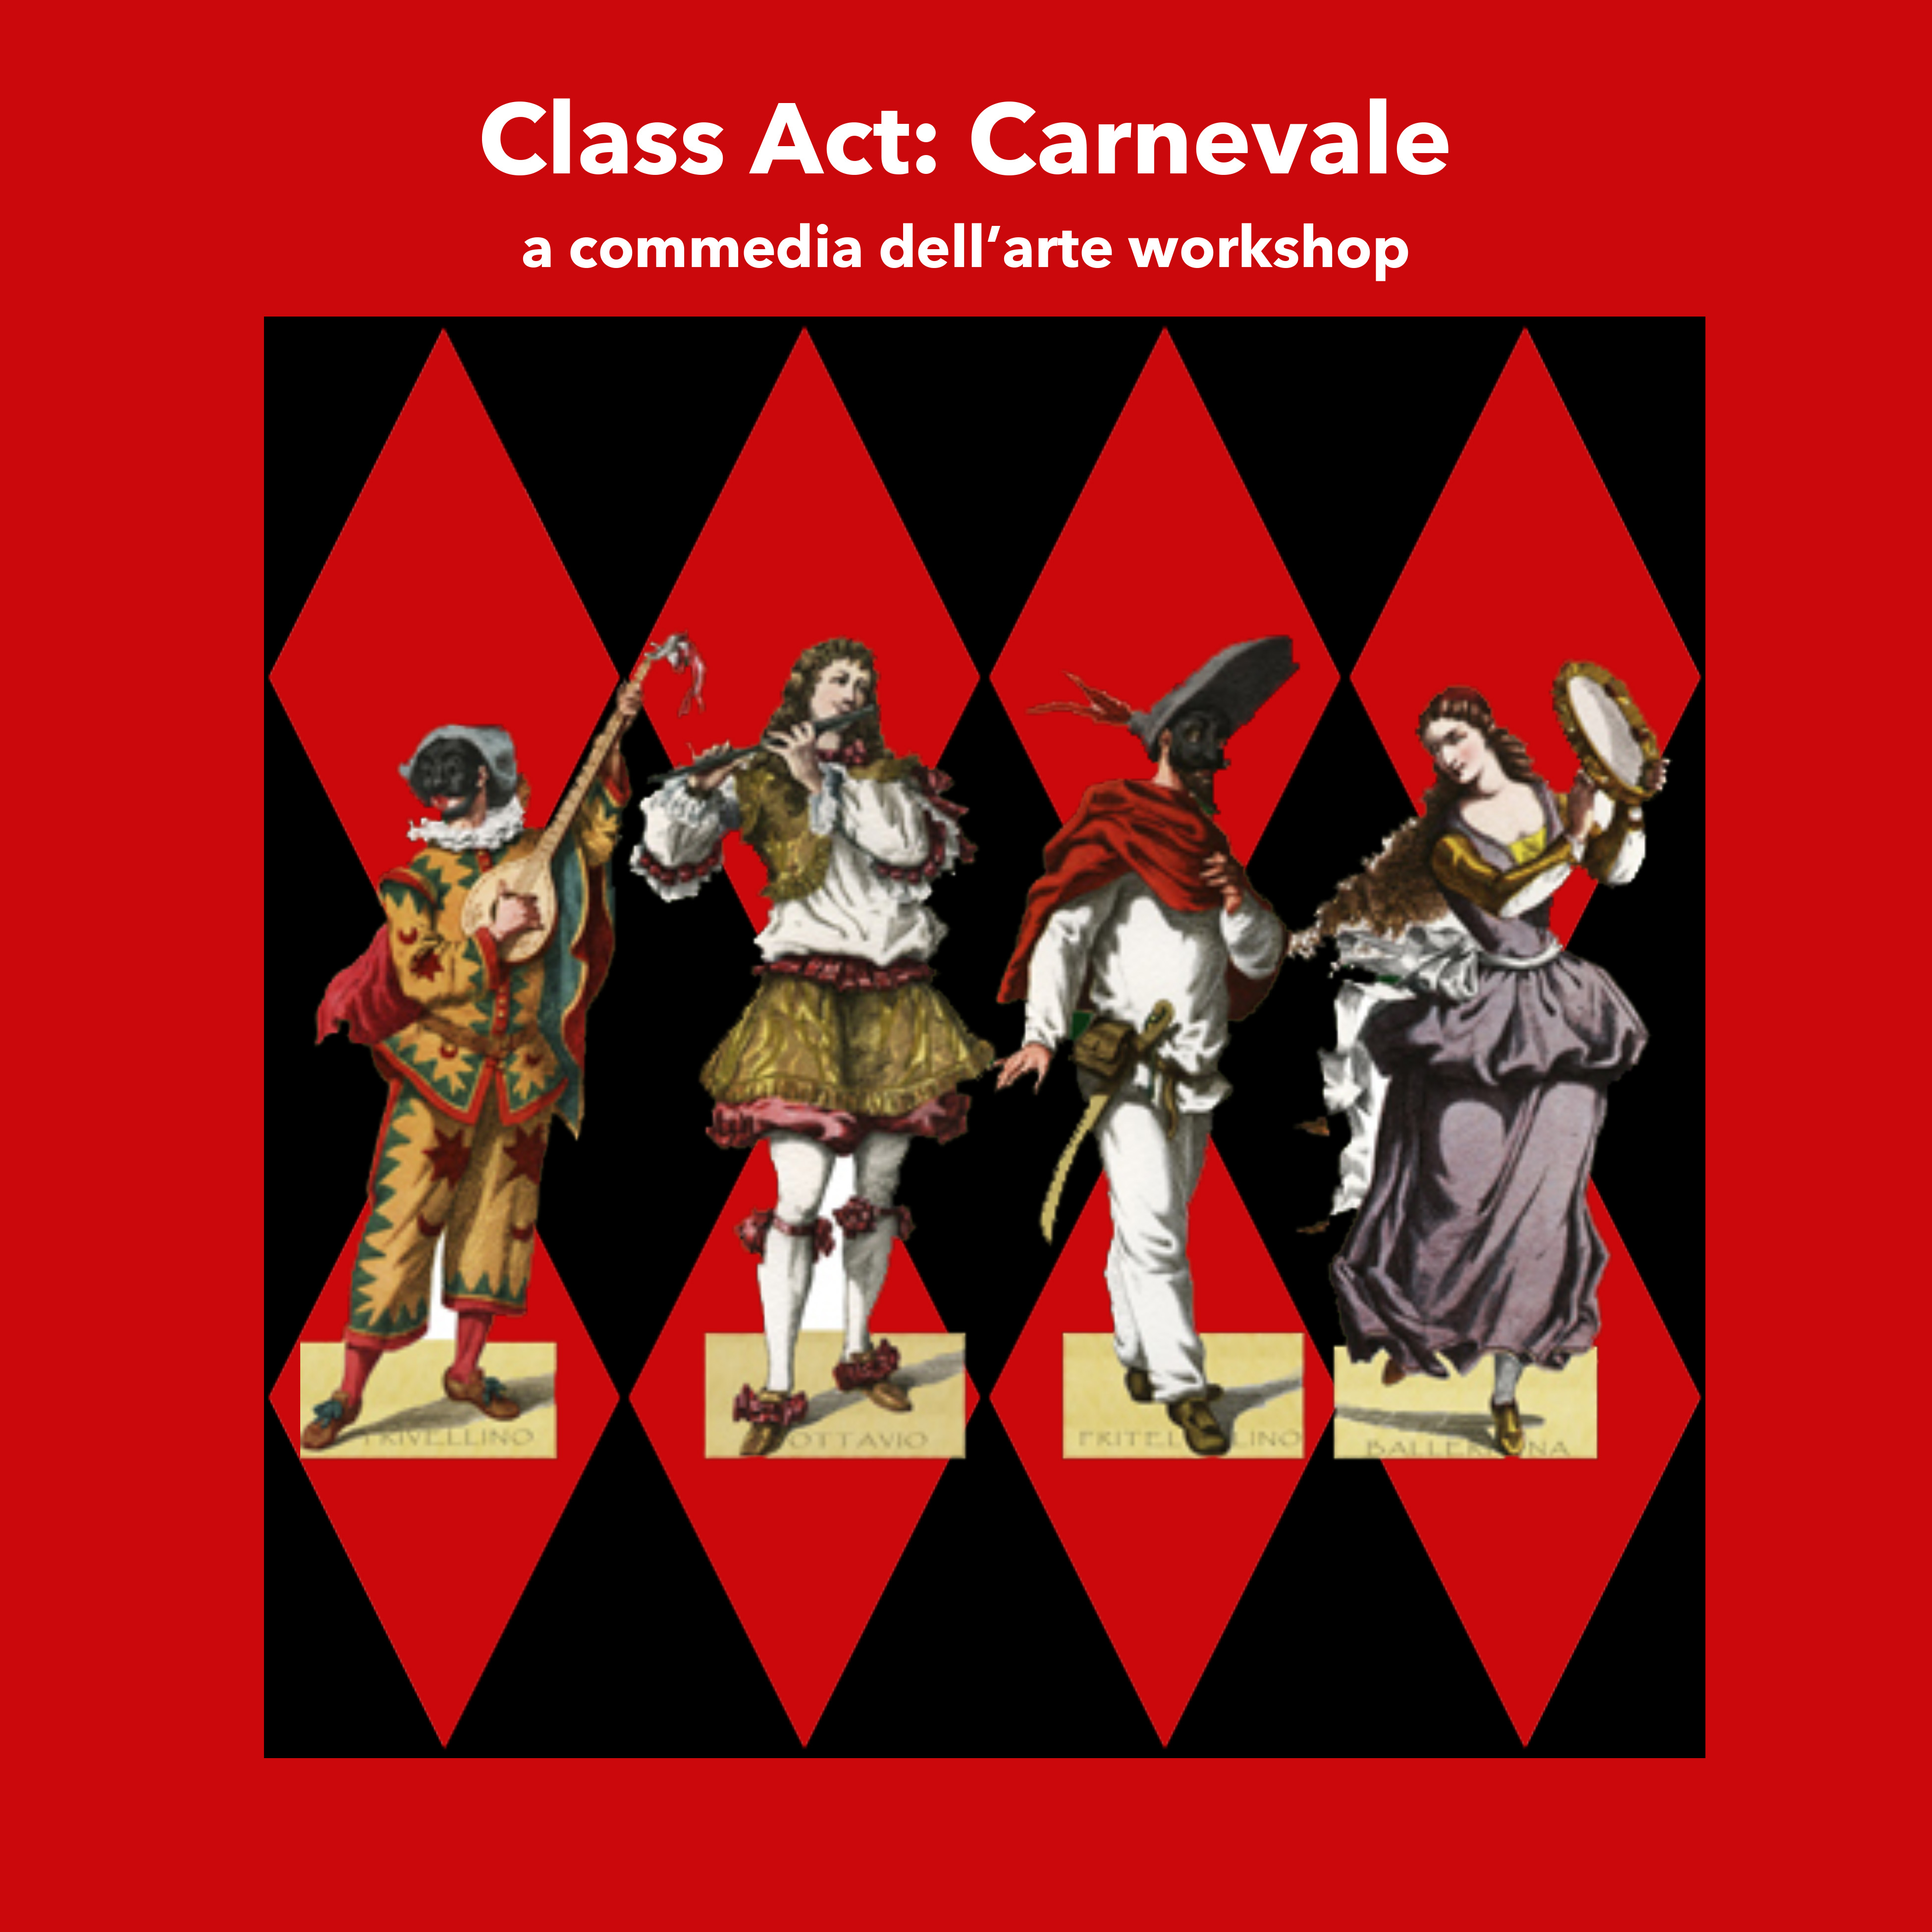 Poster for CLASS ACT: CARNEVALE, a commedia dell'arte workshop, details are the same as those listed on site.